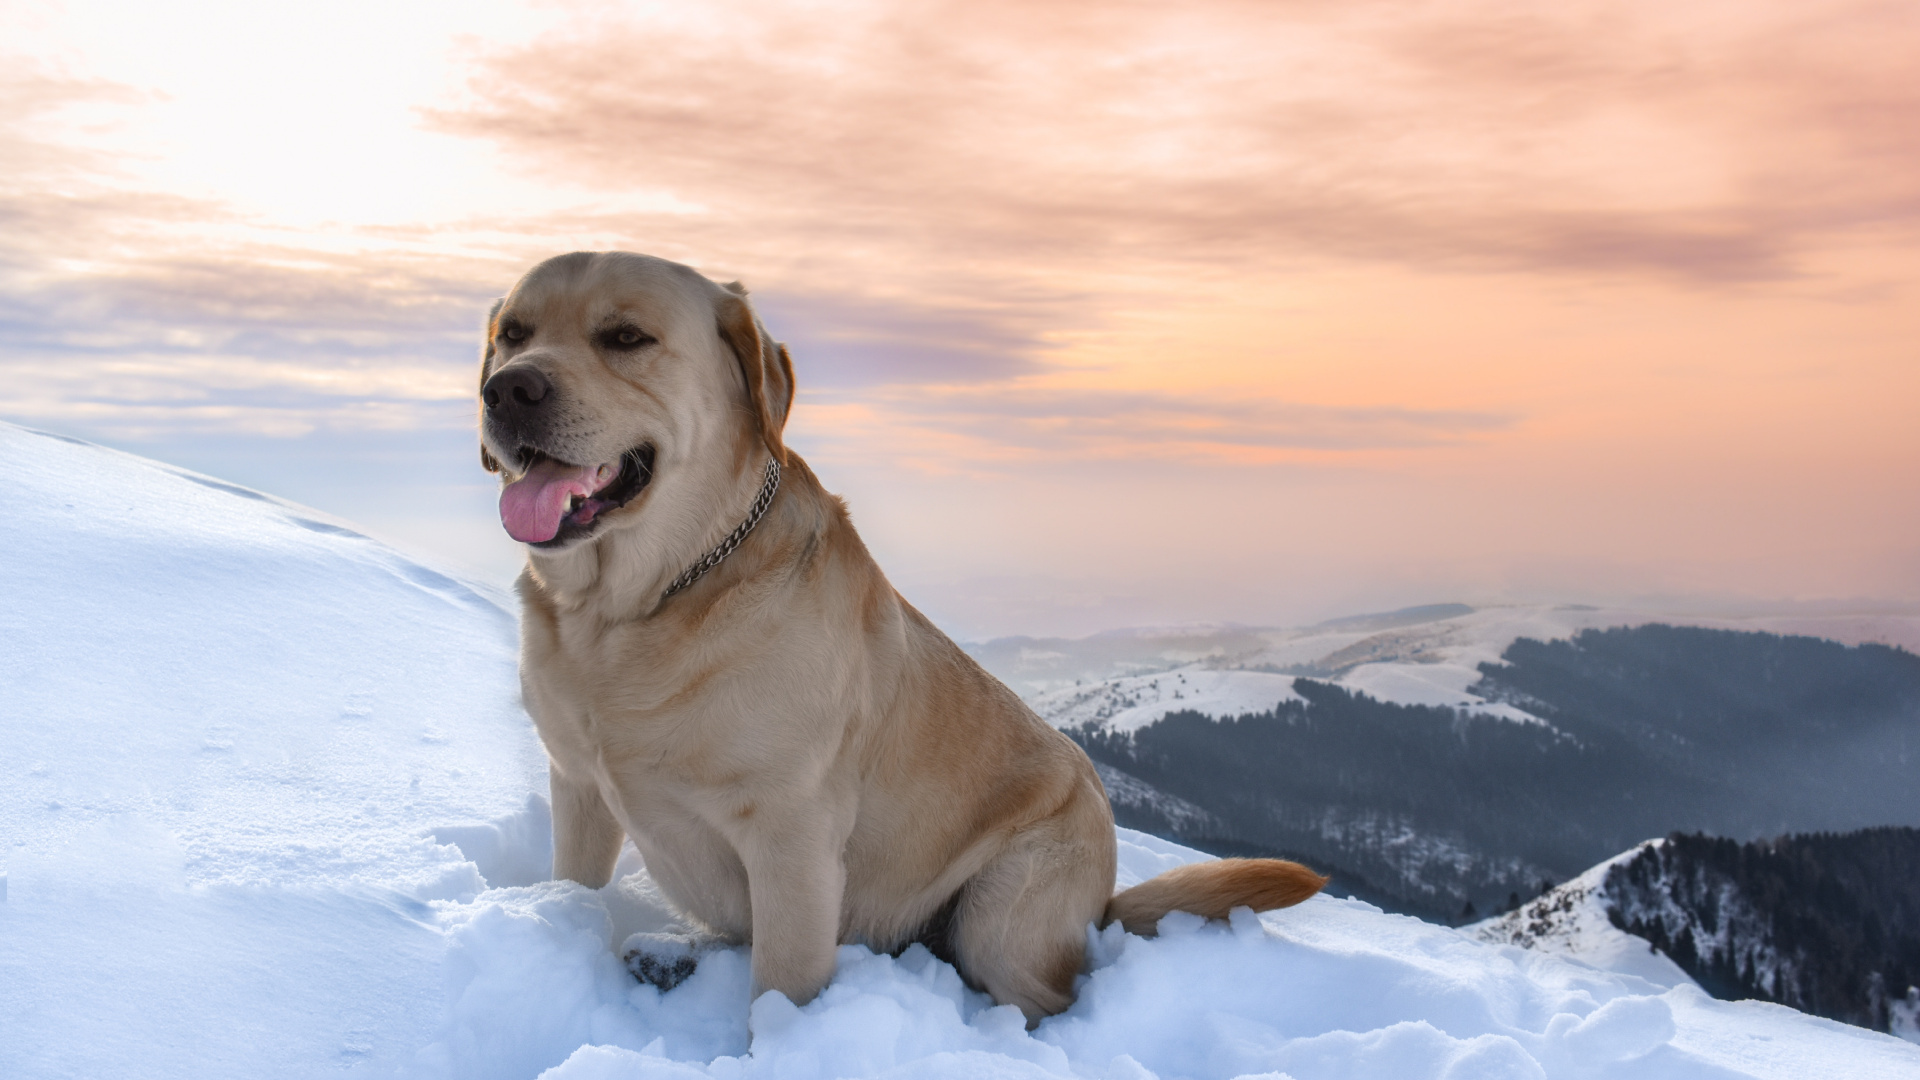 Brown Short Coated Dog on Snow Covered Ground During Daytime. Wallpaper in 1920x1080 Resolution